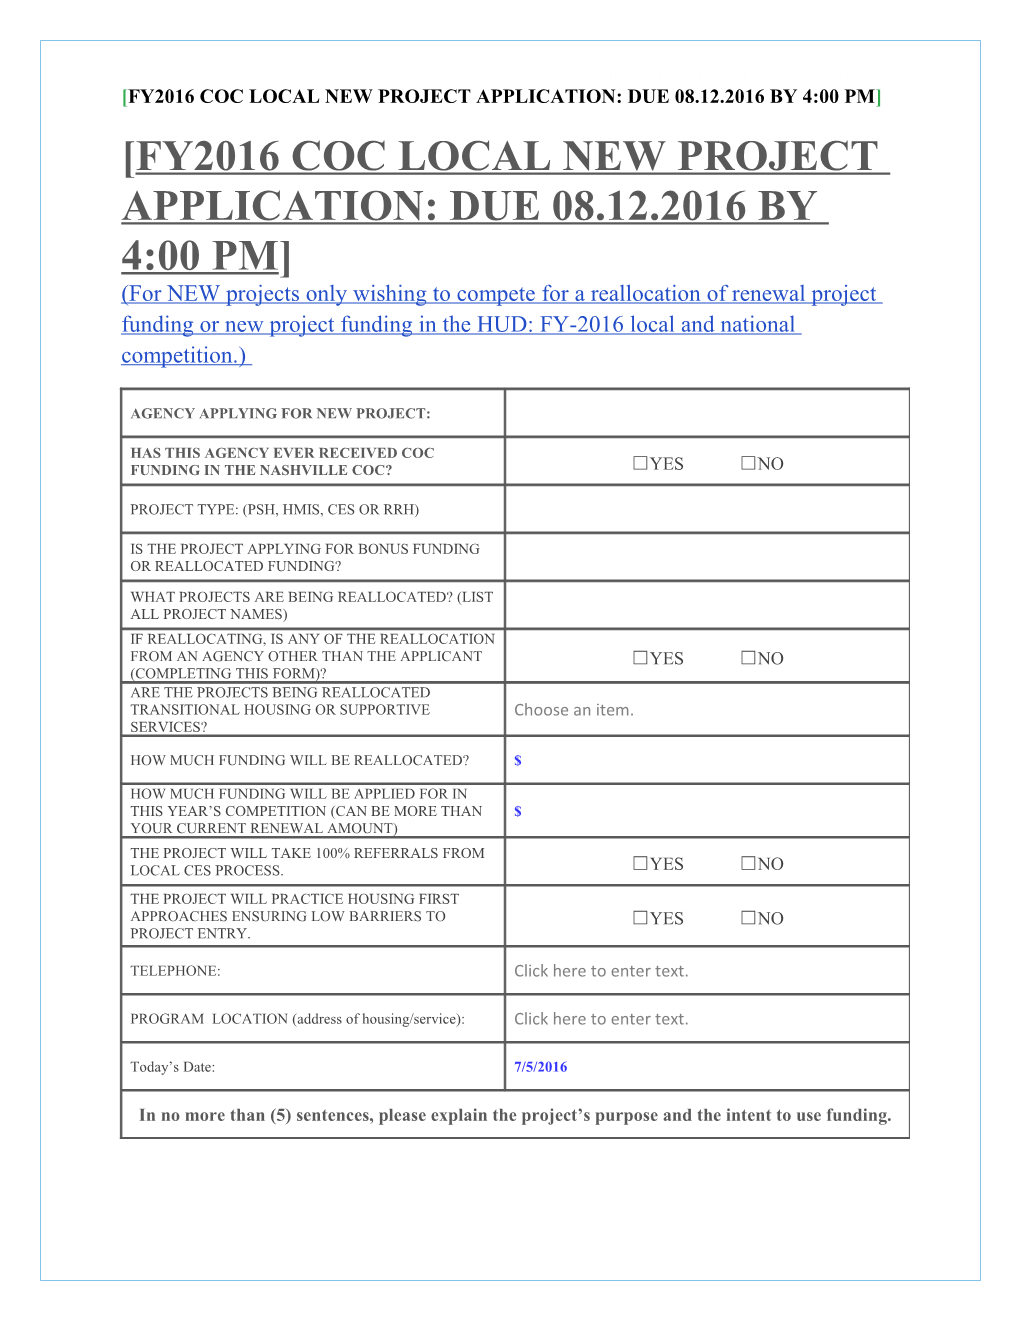 FY2016 Coc Local NEW Project APPLICATION: Due 08.12.2016 by 4:00 Pm